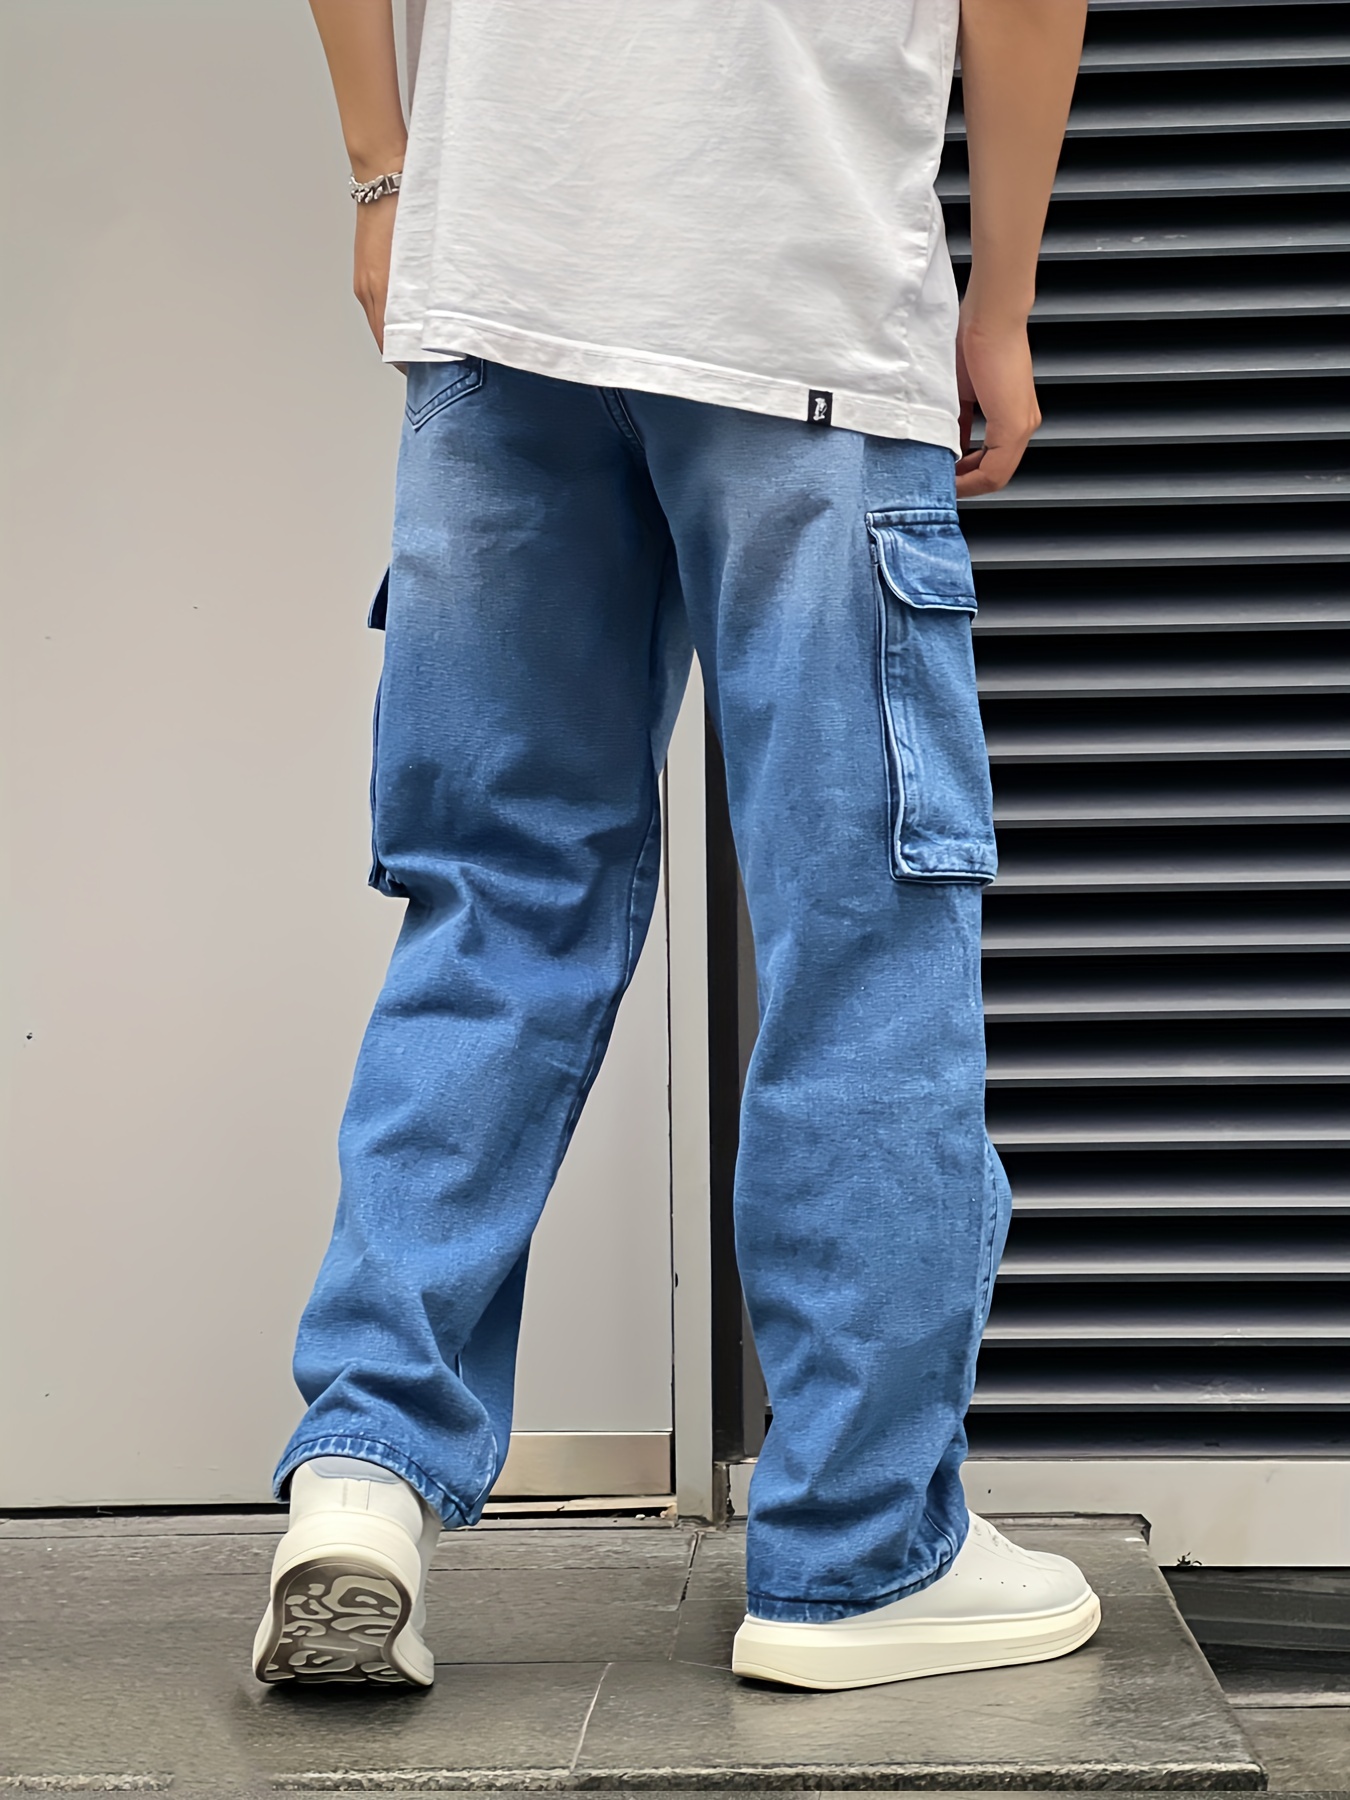 Multi Pocket Cotton Cargo Jeans, Men's Casual Street Style Denim Cargo  Pants For Spring Summer Outdoor